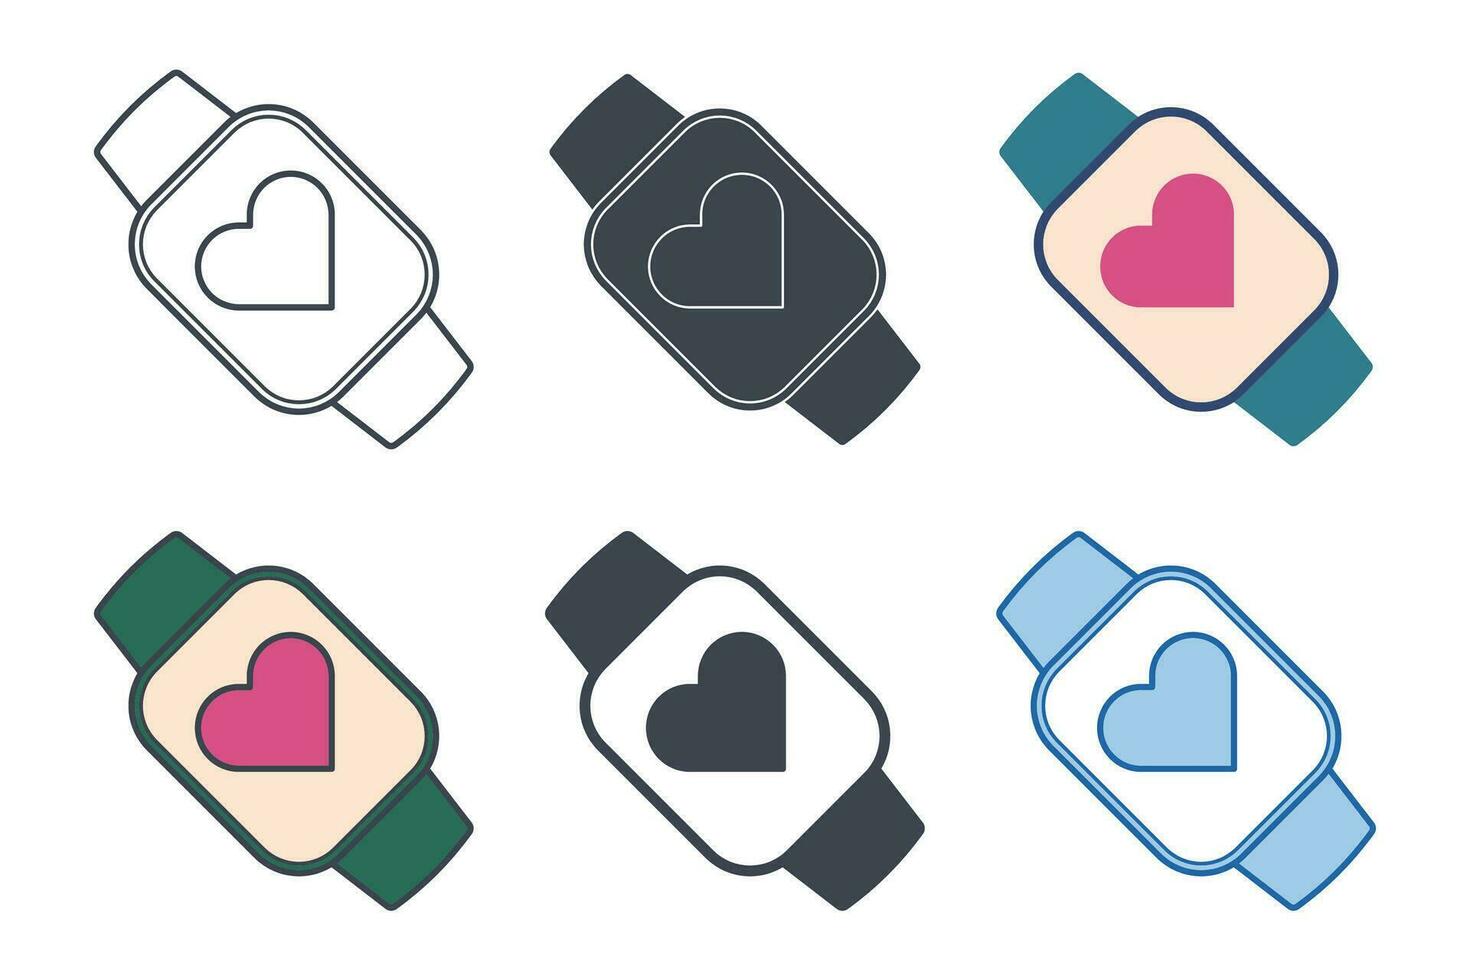 Smartwatch icon collection with different styles. Fitness Tracker icon symbol vector illustration isolated on white background